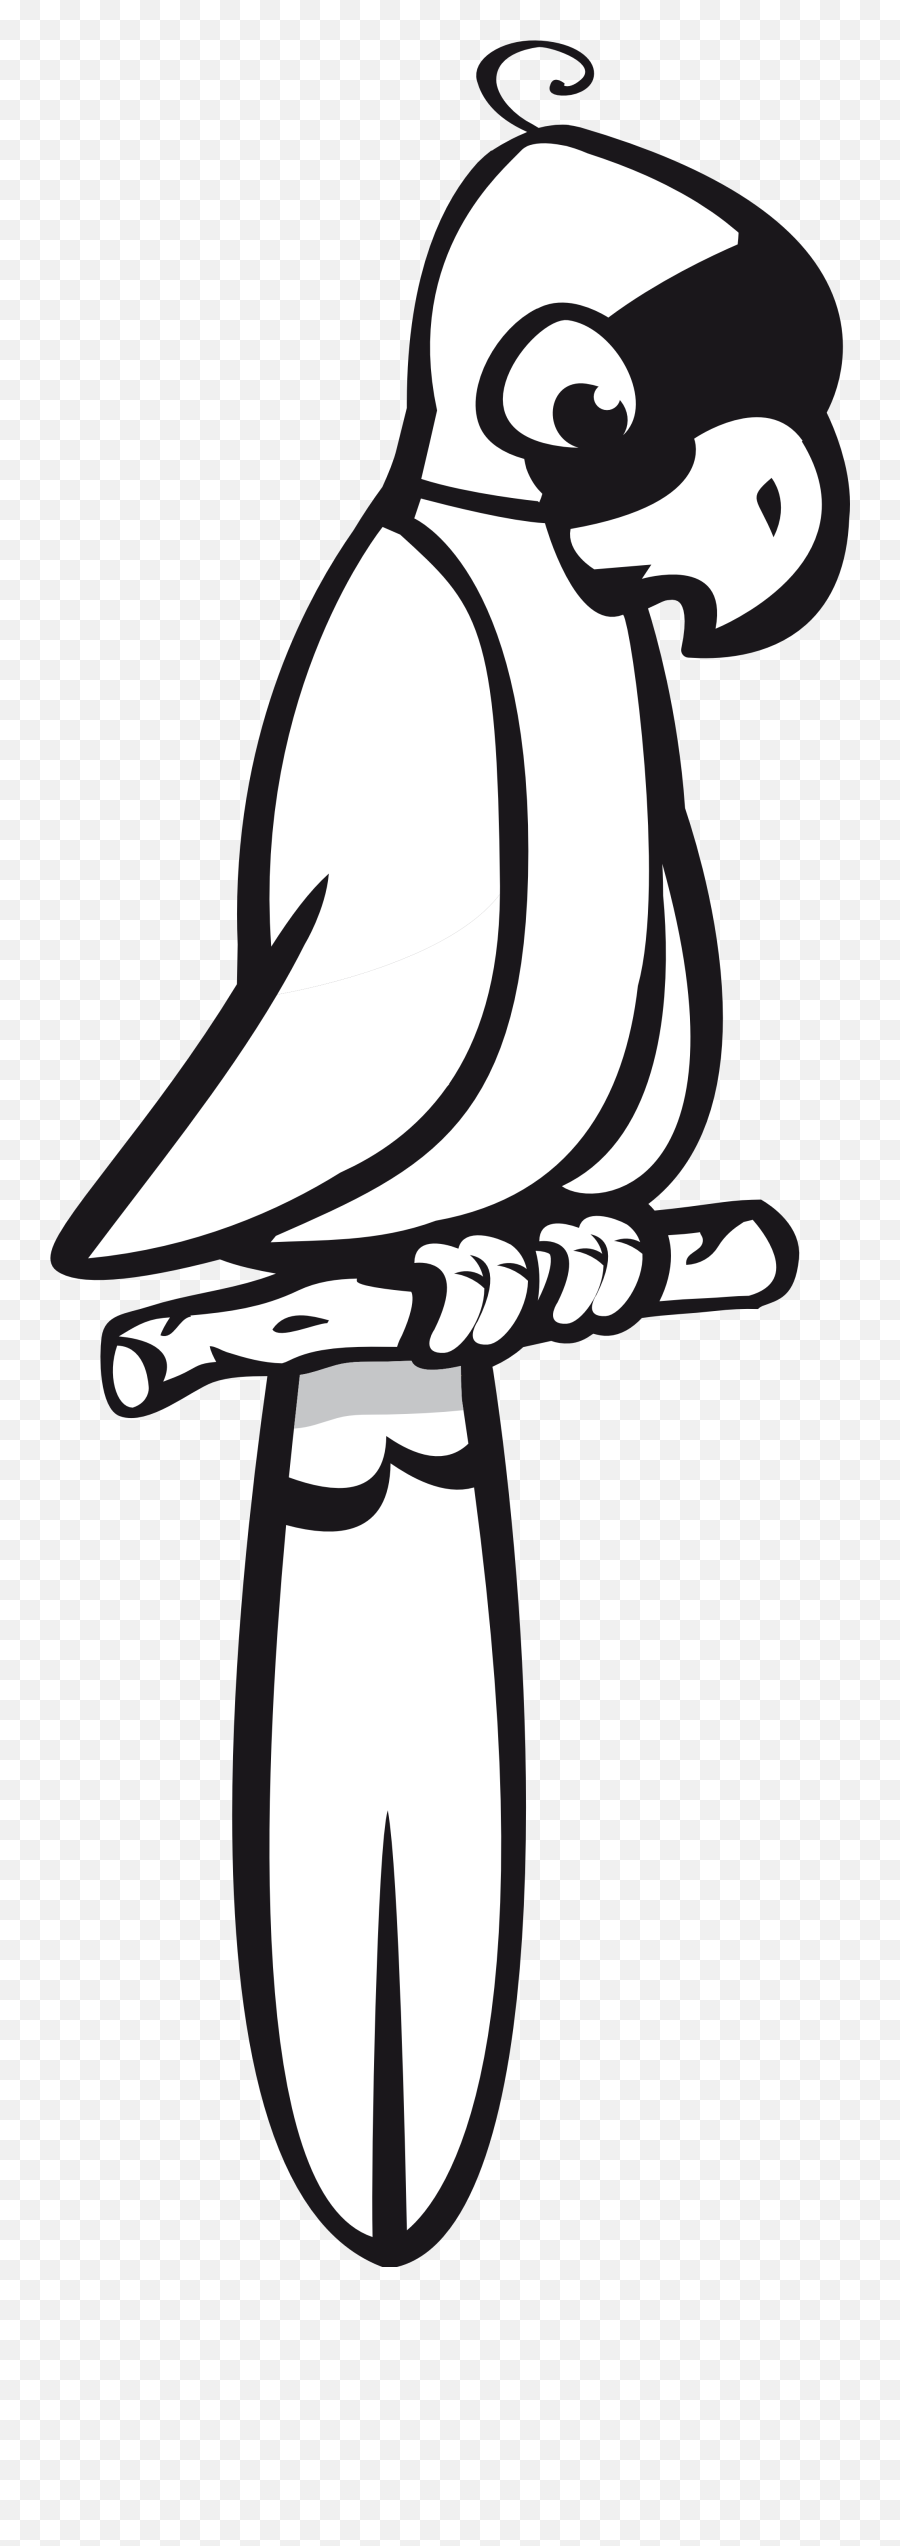 Muscles Clipart Black And White Muscles Black And White - Parrot Clipart Black And White Transparent Background Emoji,Black And White Clipart